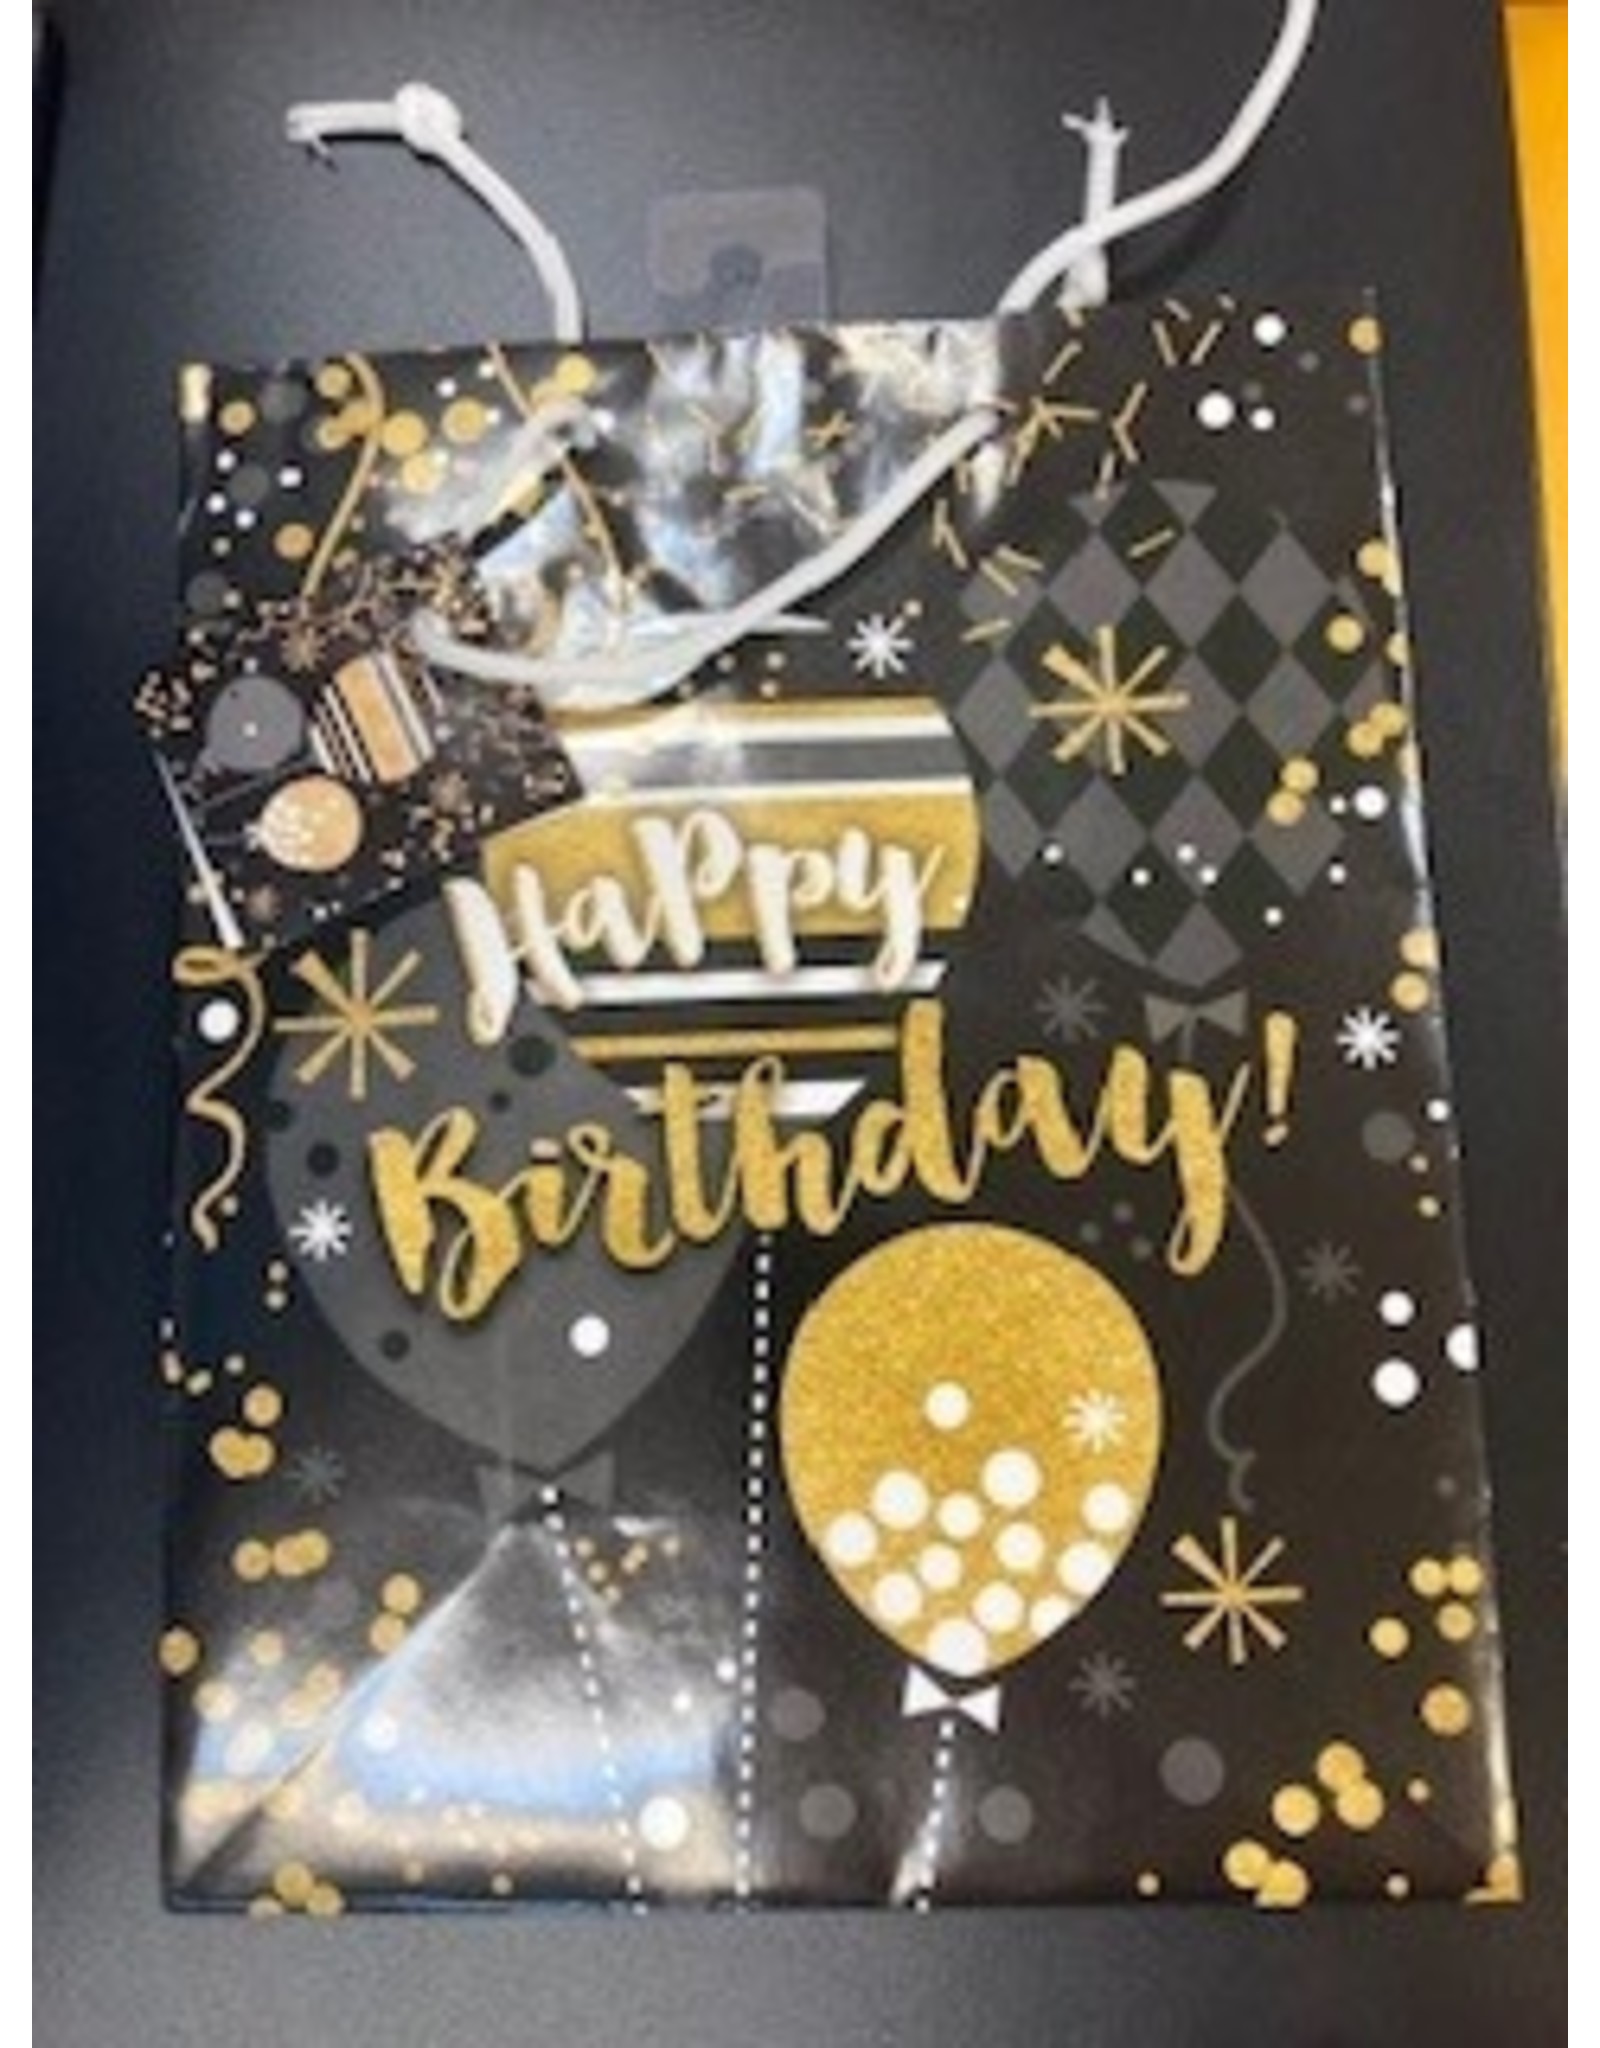 Party Bag Black and Gold